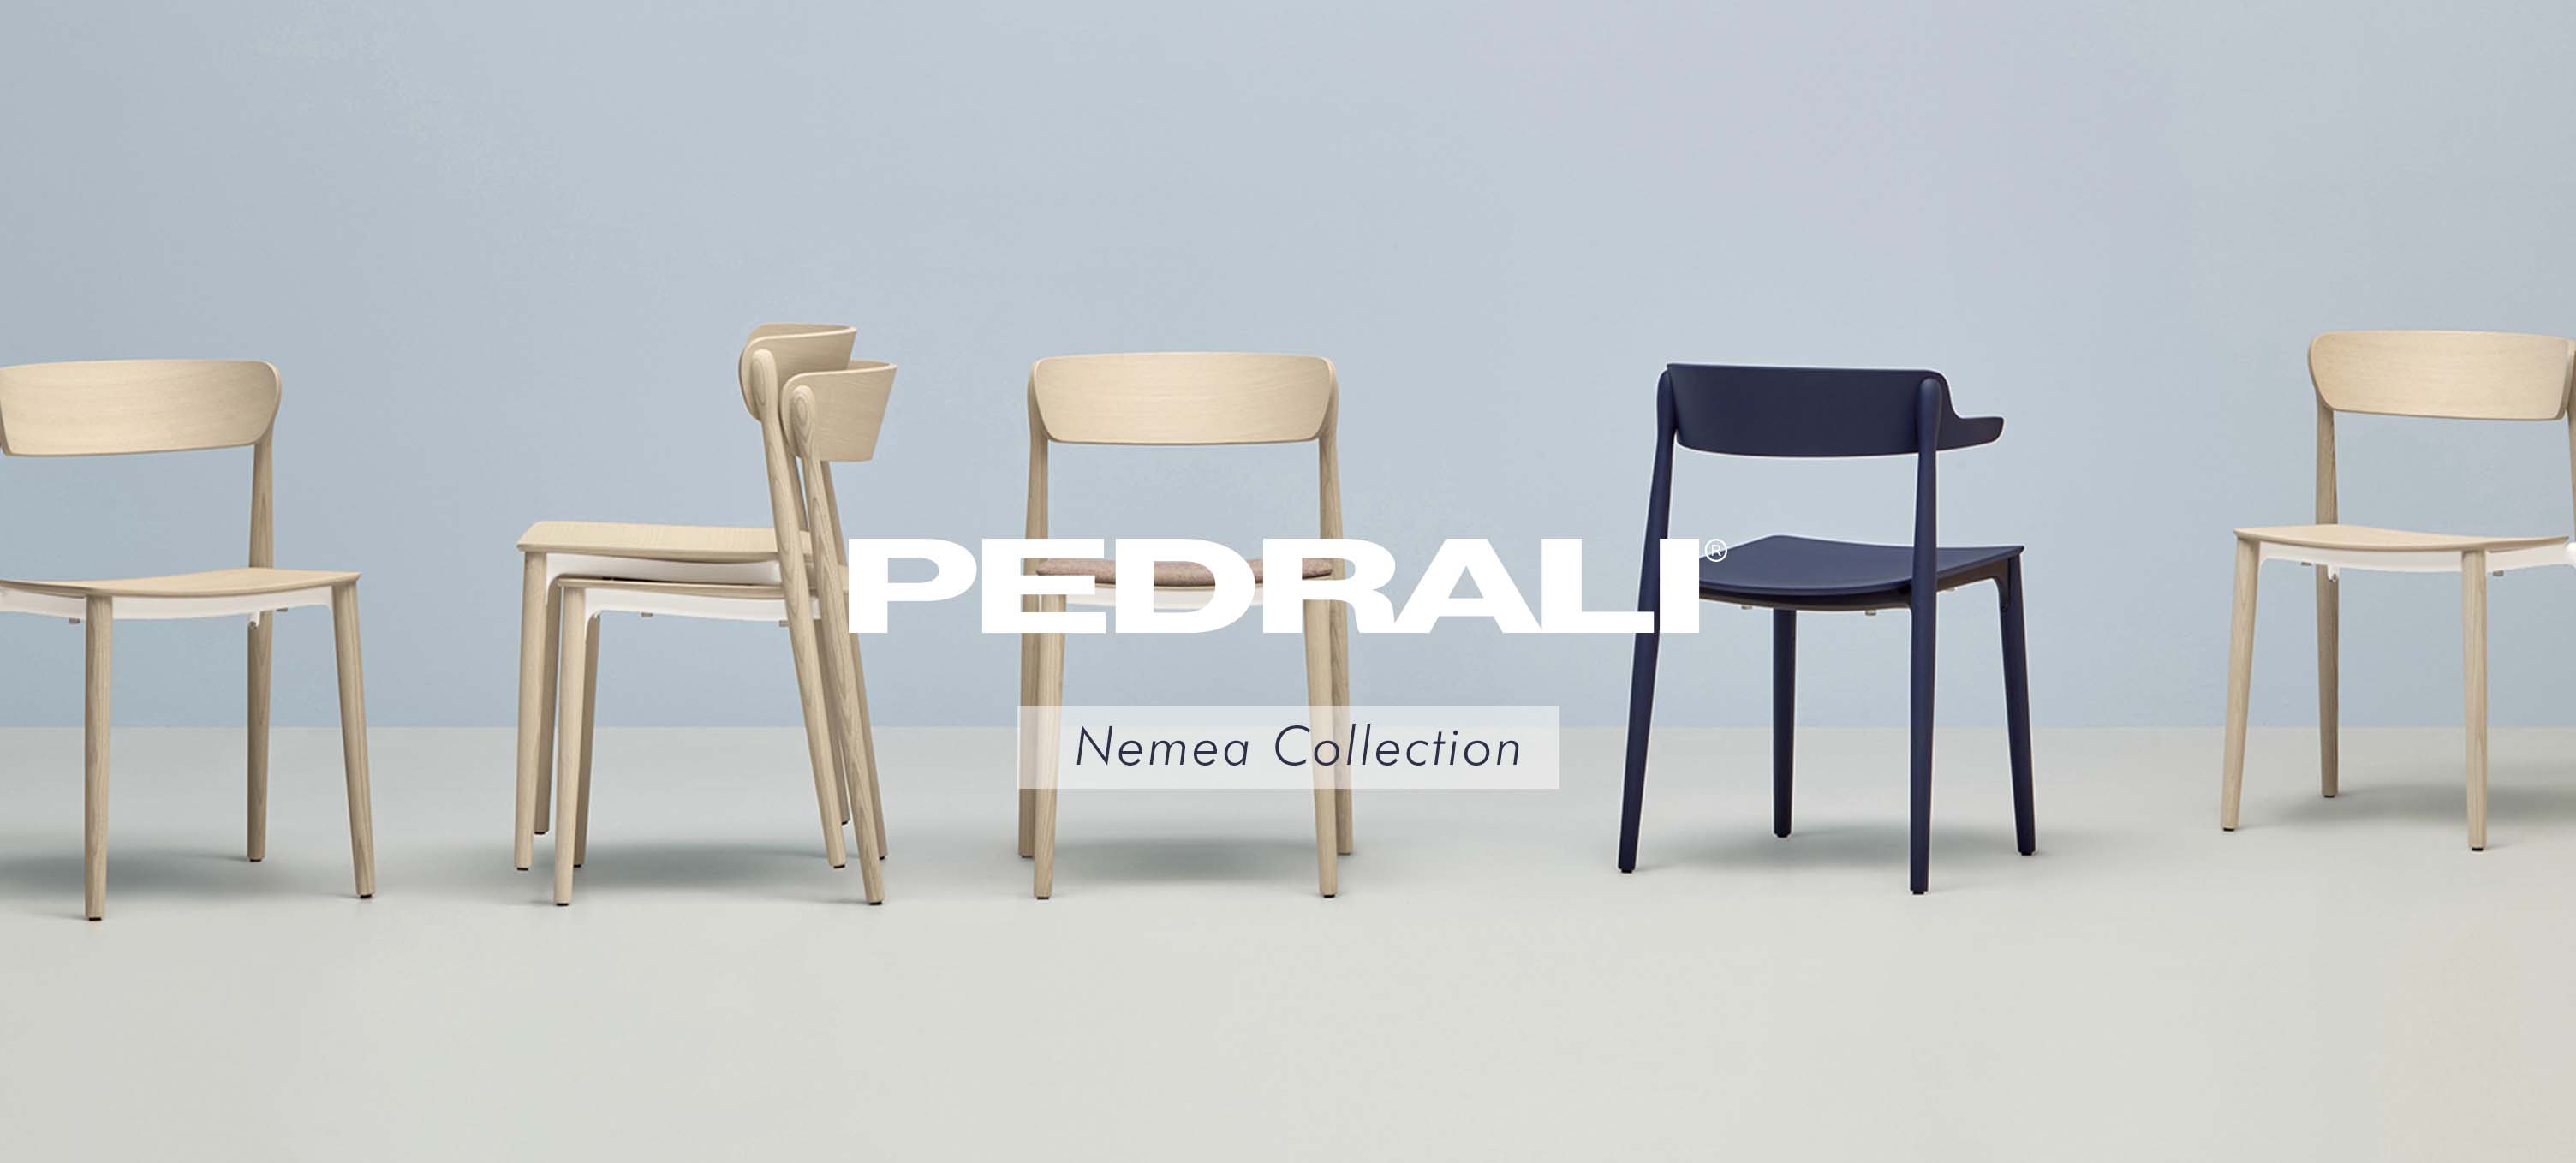 Pedrali Nemea Collection indoor dining hospitality furniture 